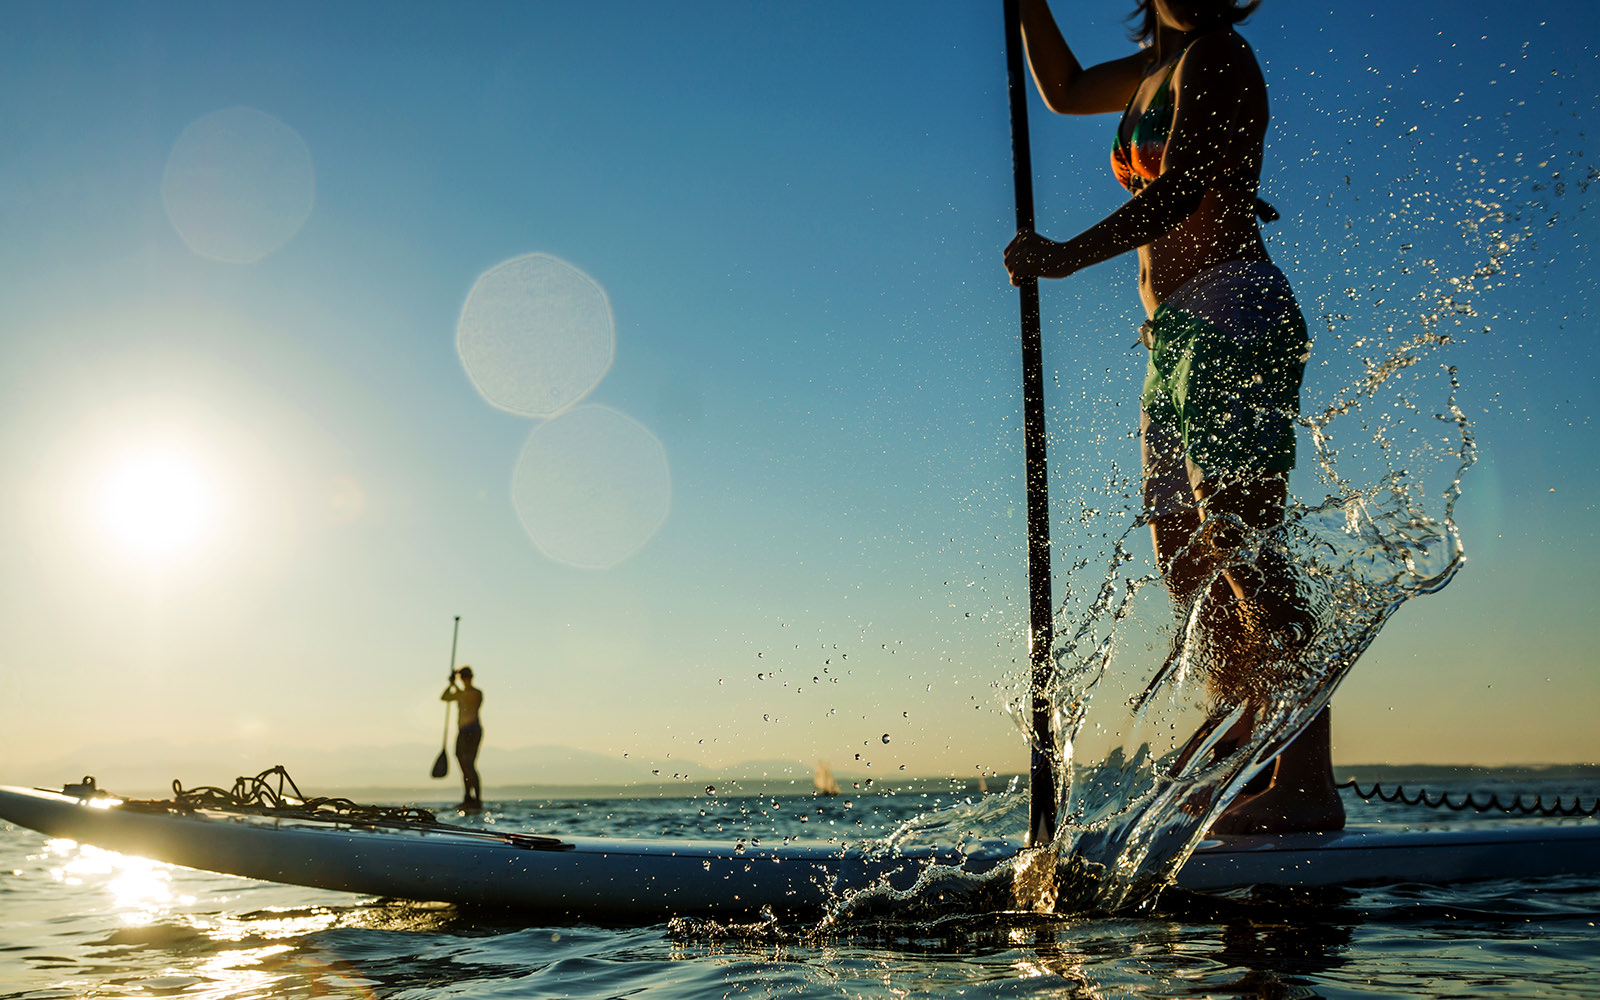 Stand-Up Paddleboard Rentals (SUP)